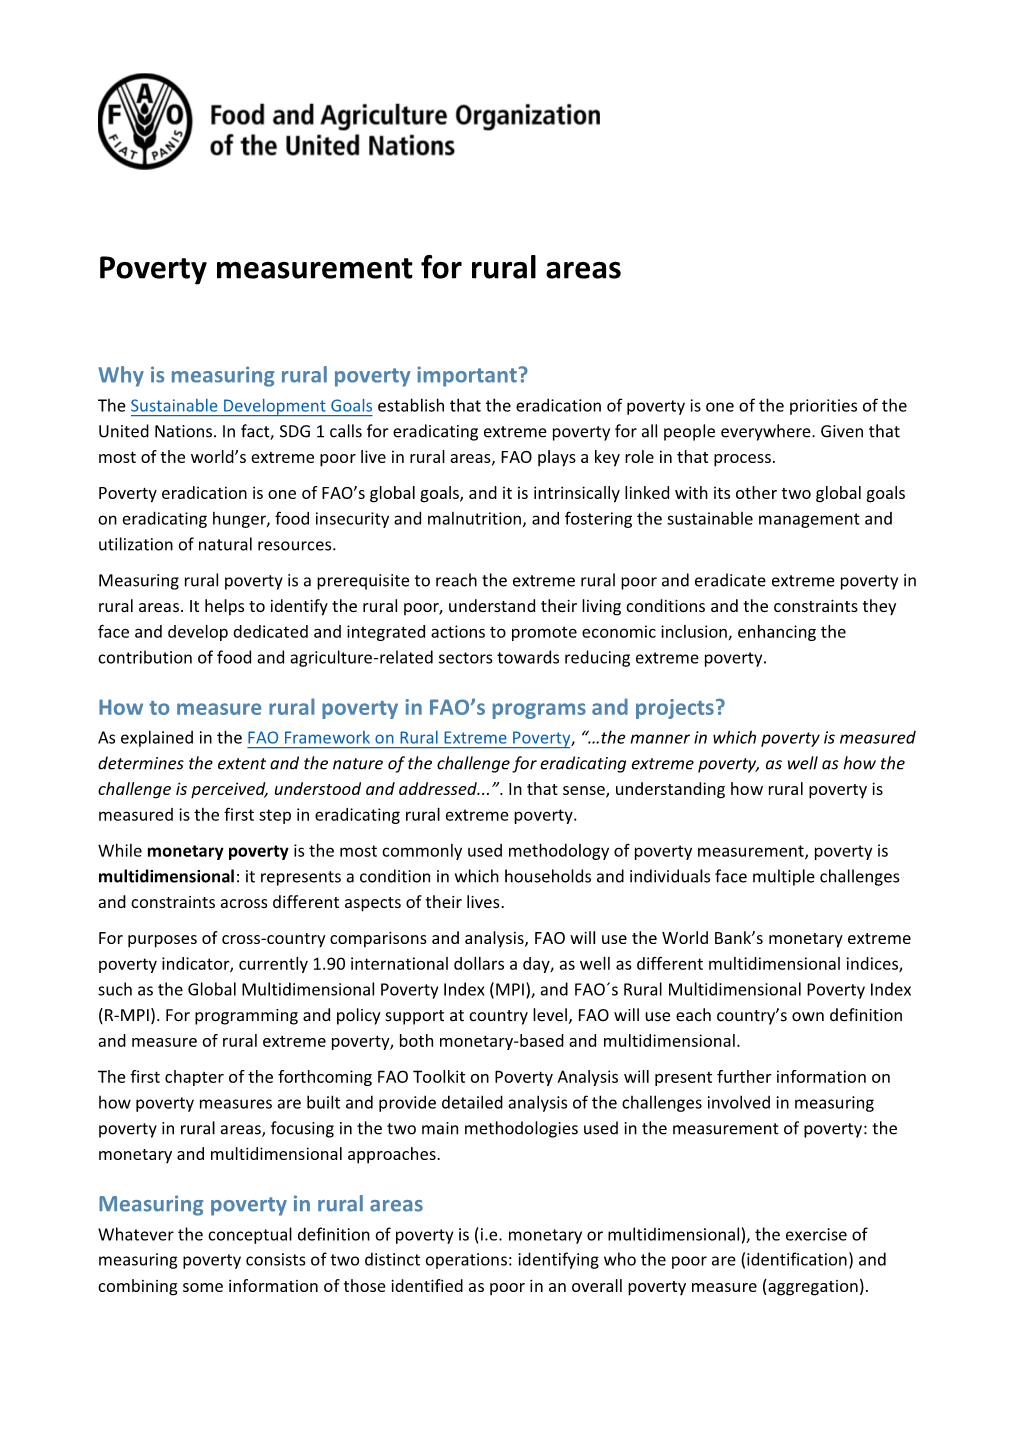 Poverty Measure for Rural Areas